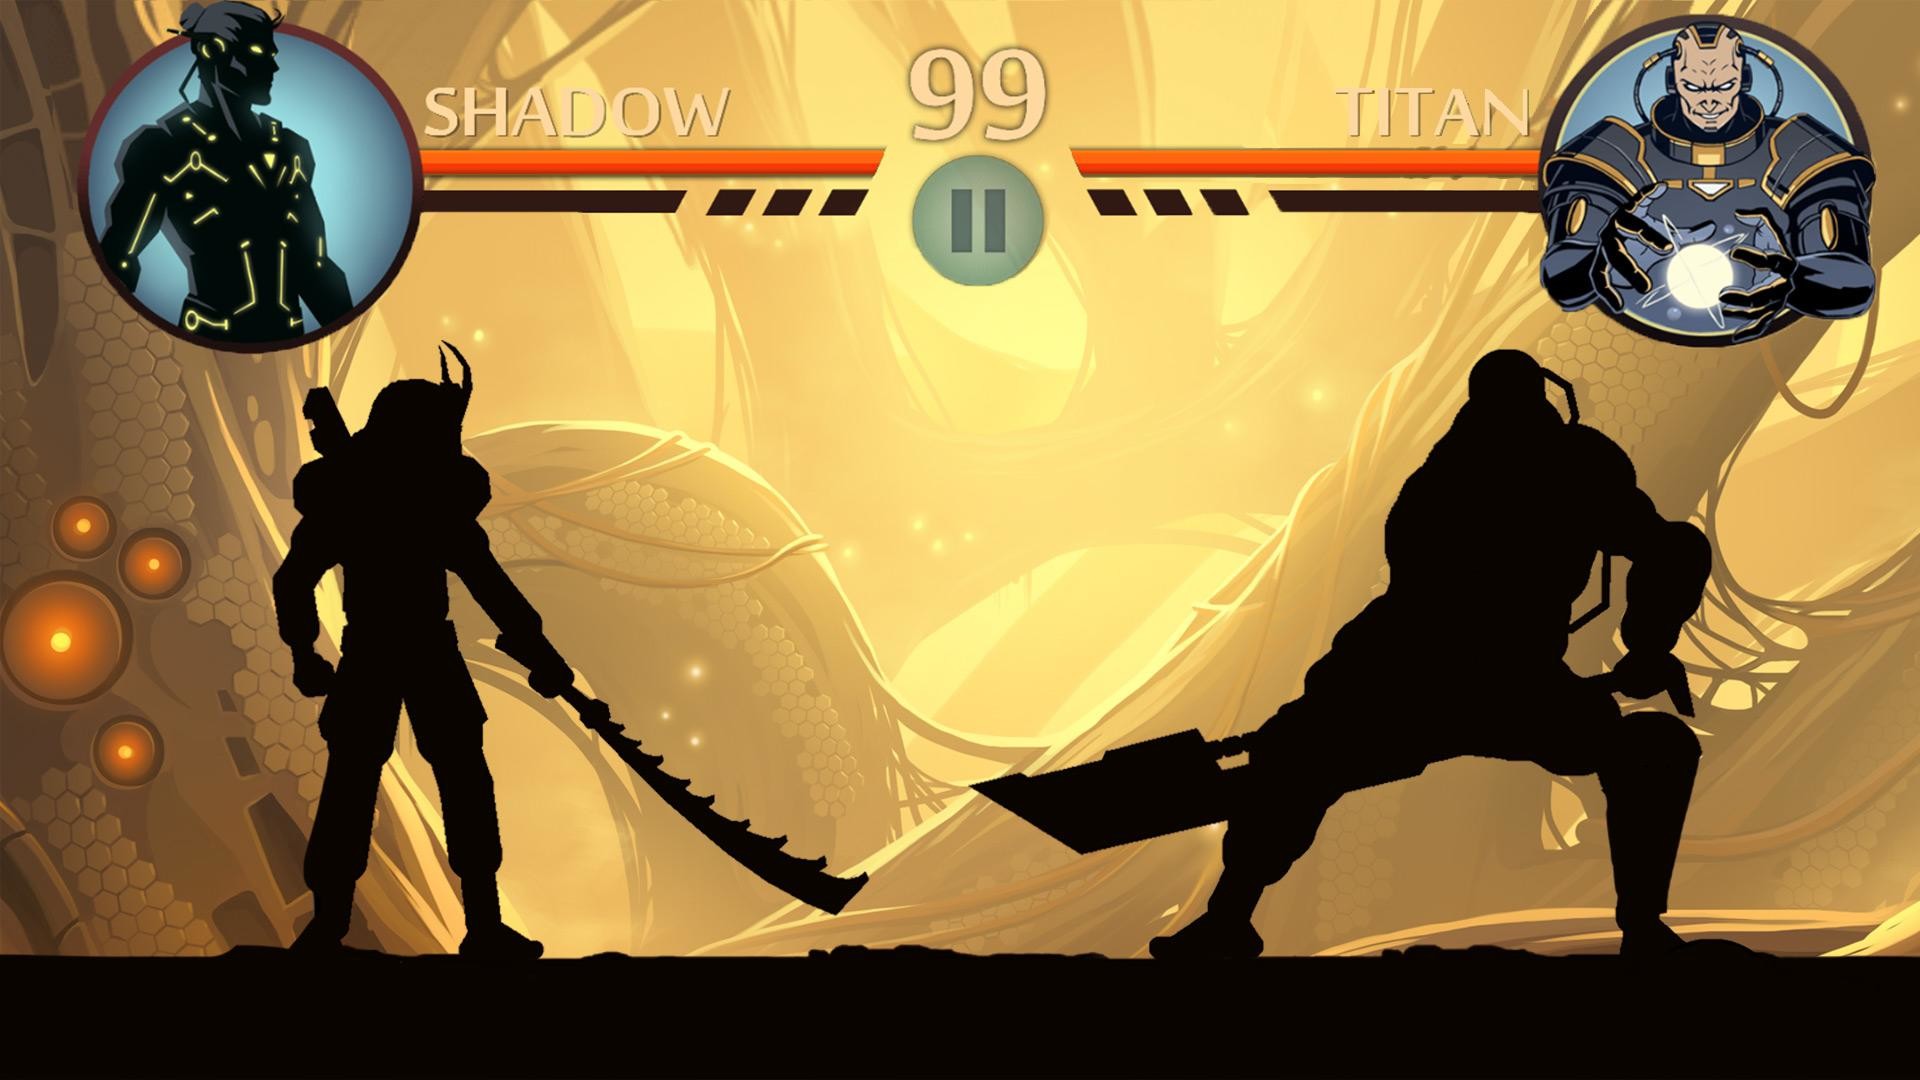 shadow fight 3 download for pc windows 10